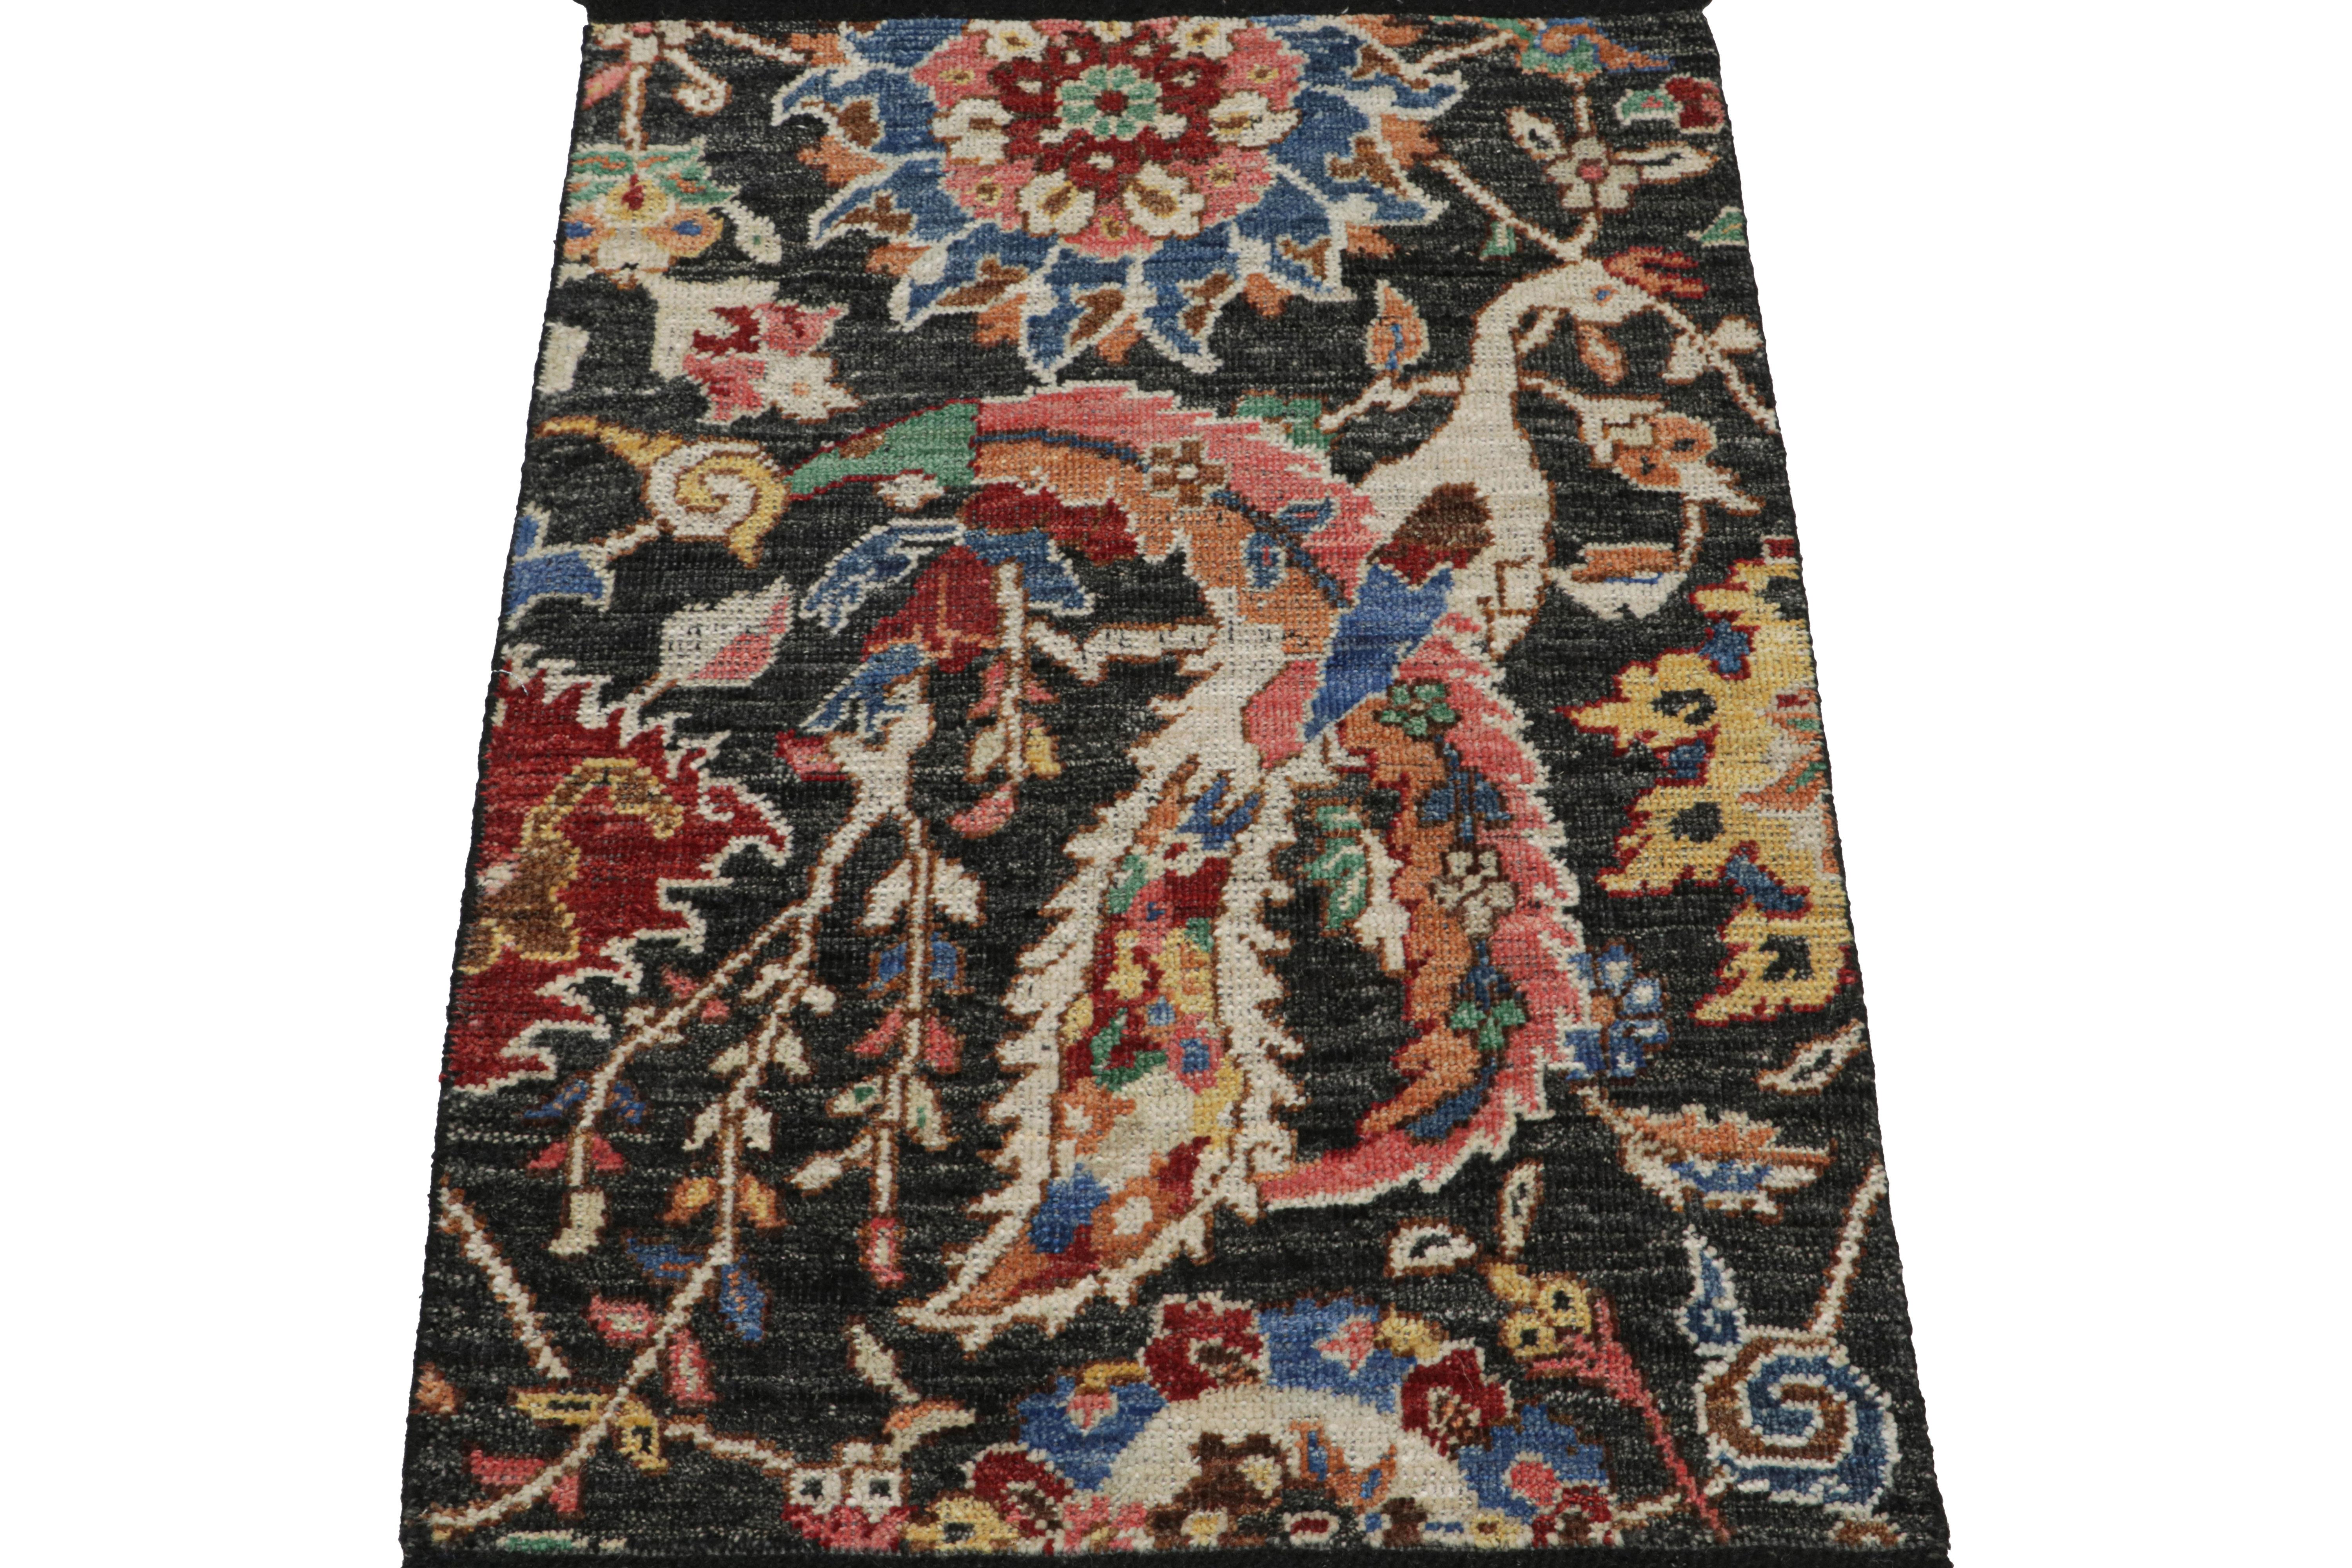 This contemporary 2x3 rug is a grand new entry to Rug & Kilim’s custom classics Burano Collection. Hand-knotted in wool, this design is inspired by 17th-century antique Persian rugs of the Kerman province. 

On the design: 

Connoisseurs may admire